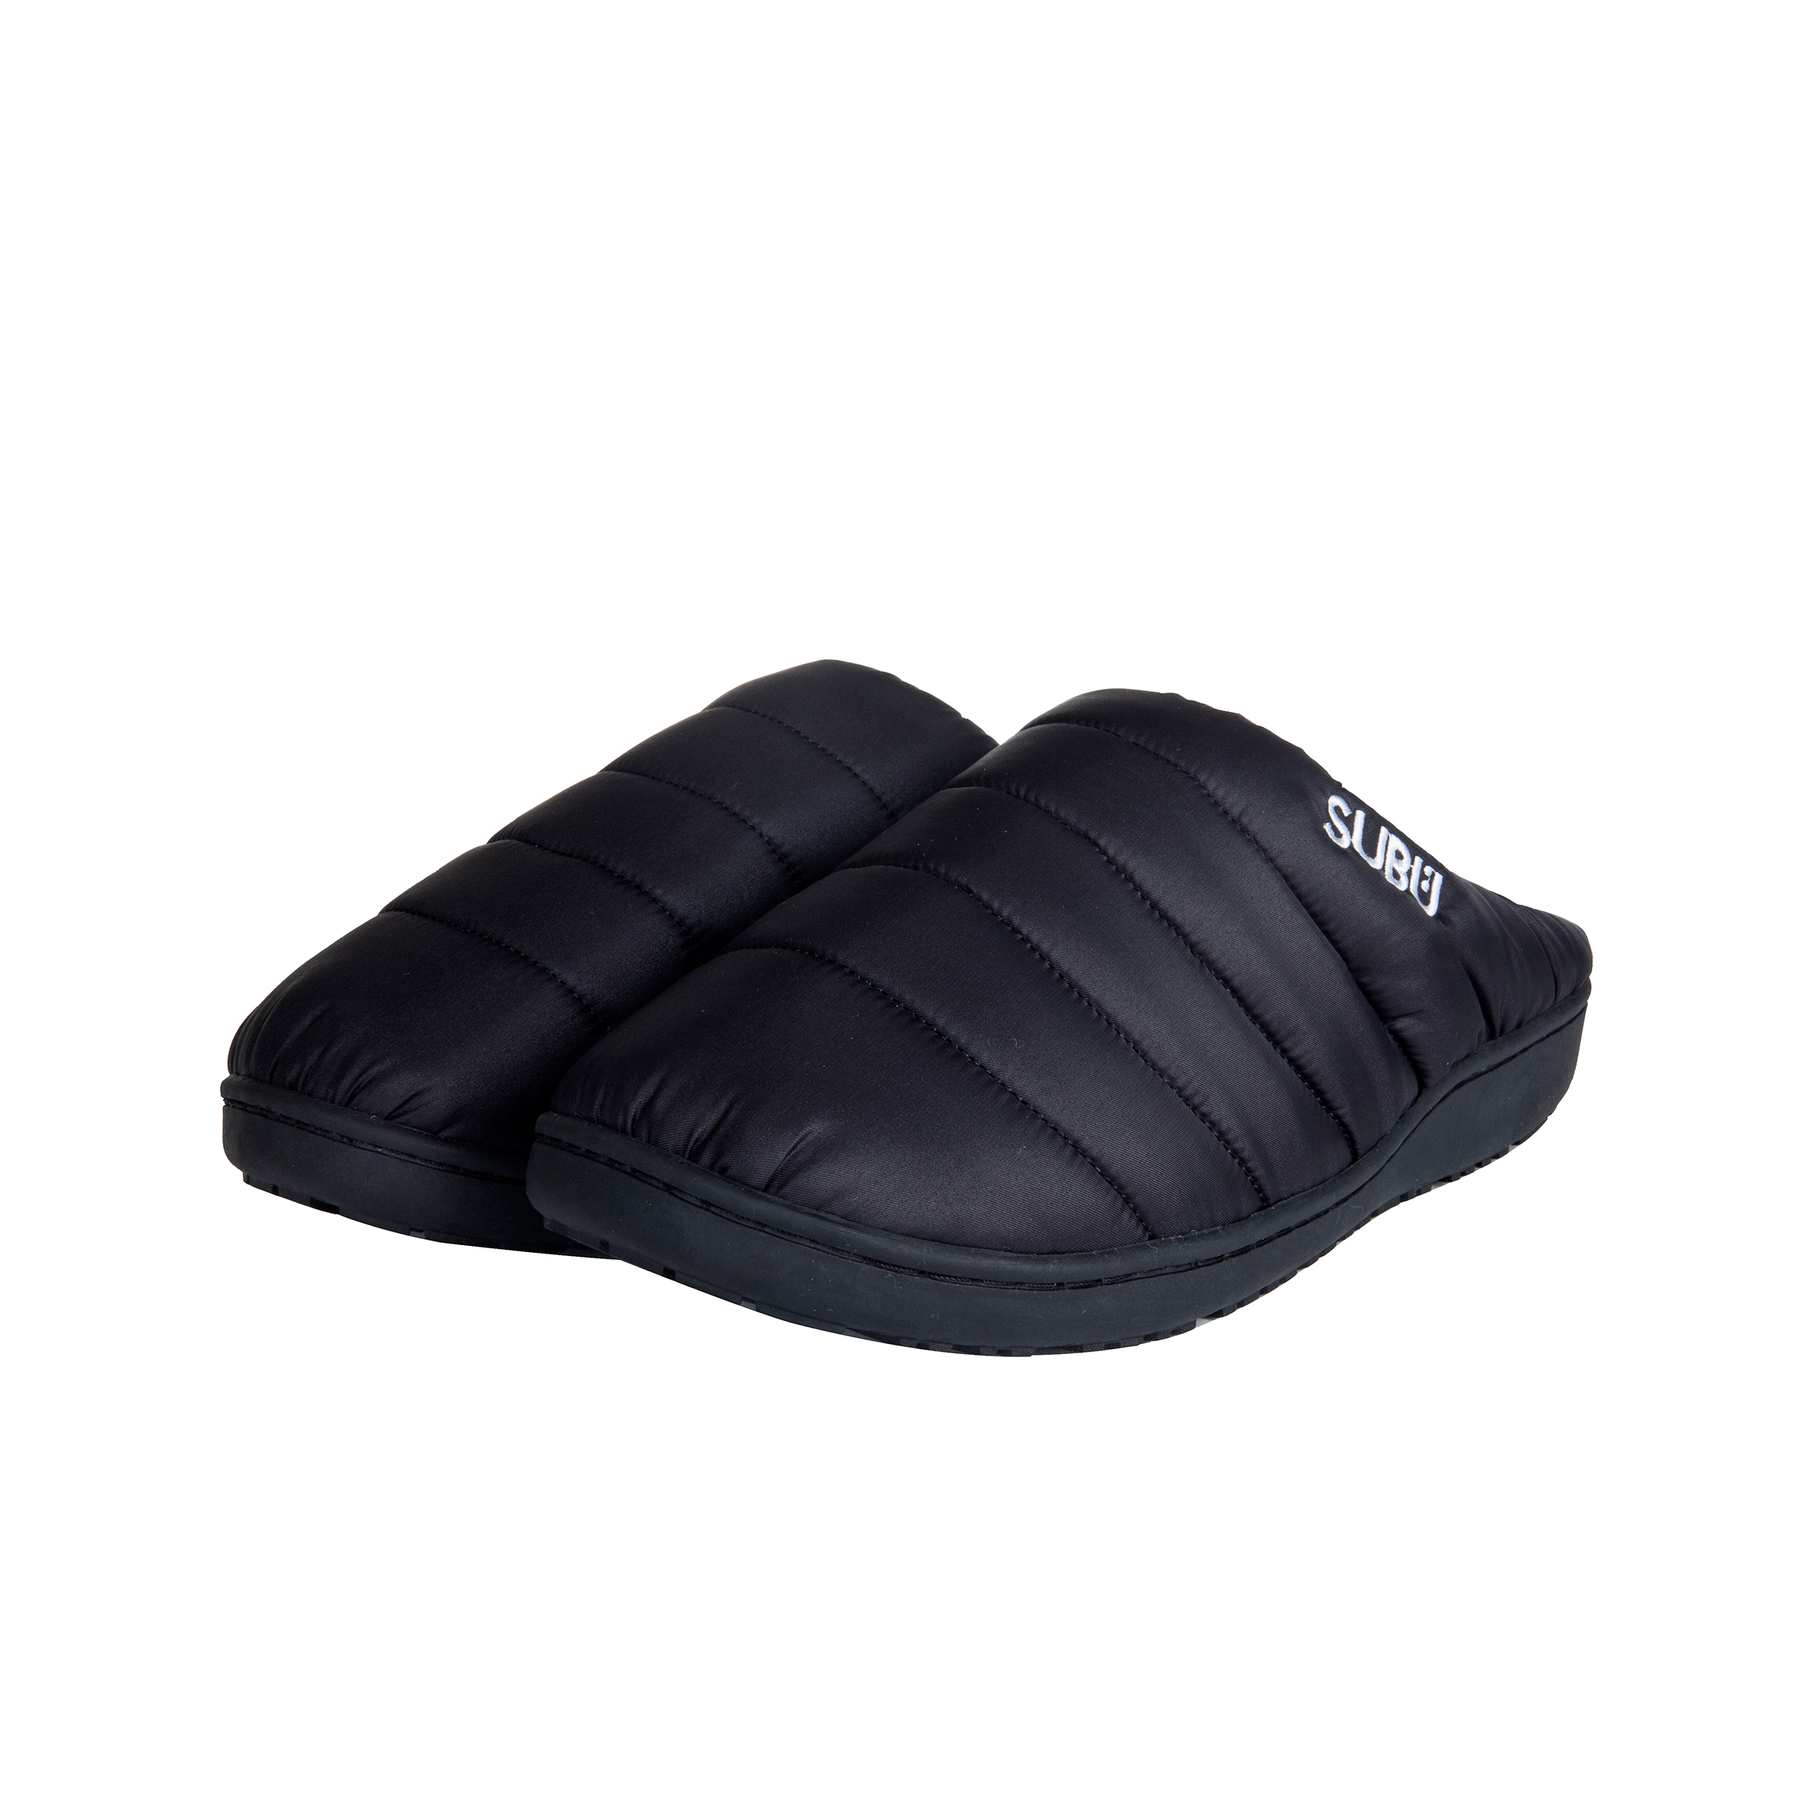 SUBU, Fall & Winter Slippers Black, Size, 1, Slippers,